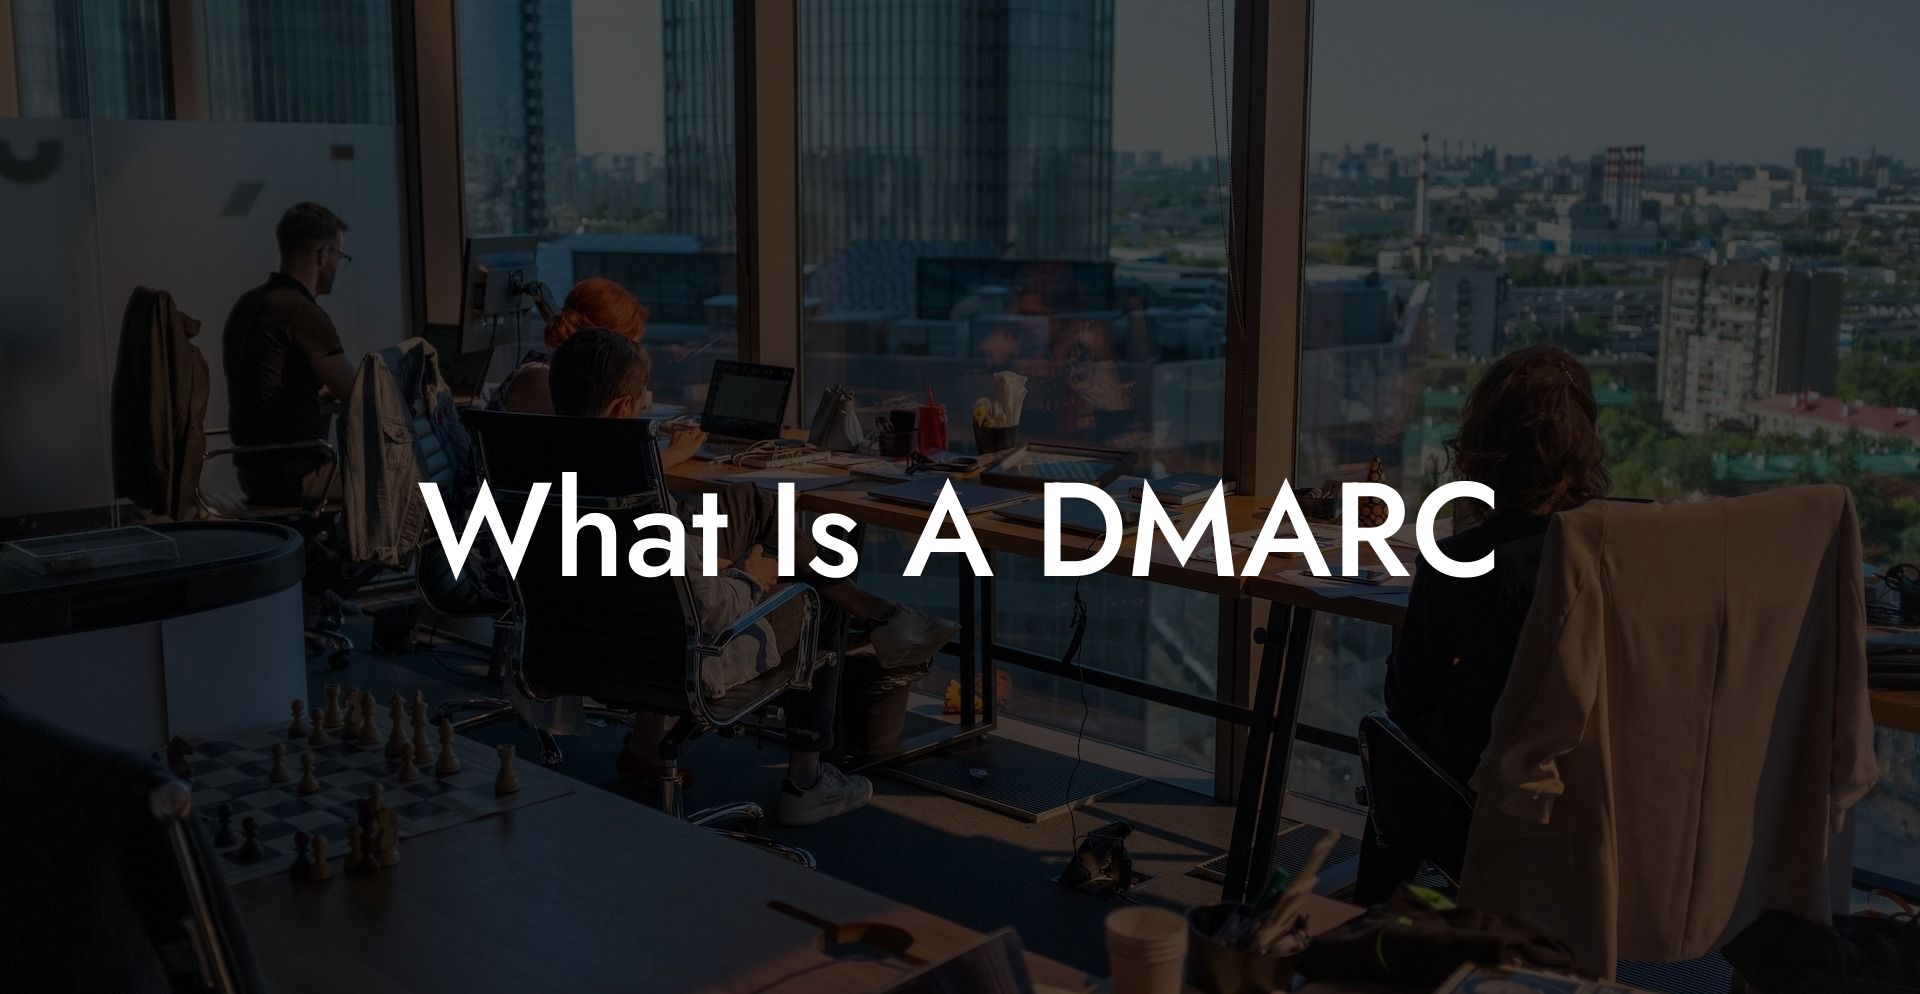 What Is A DMARC